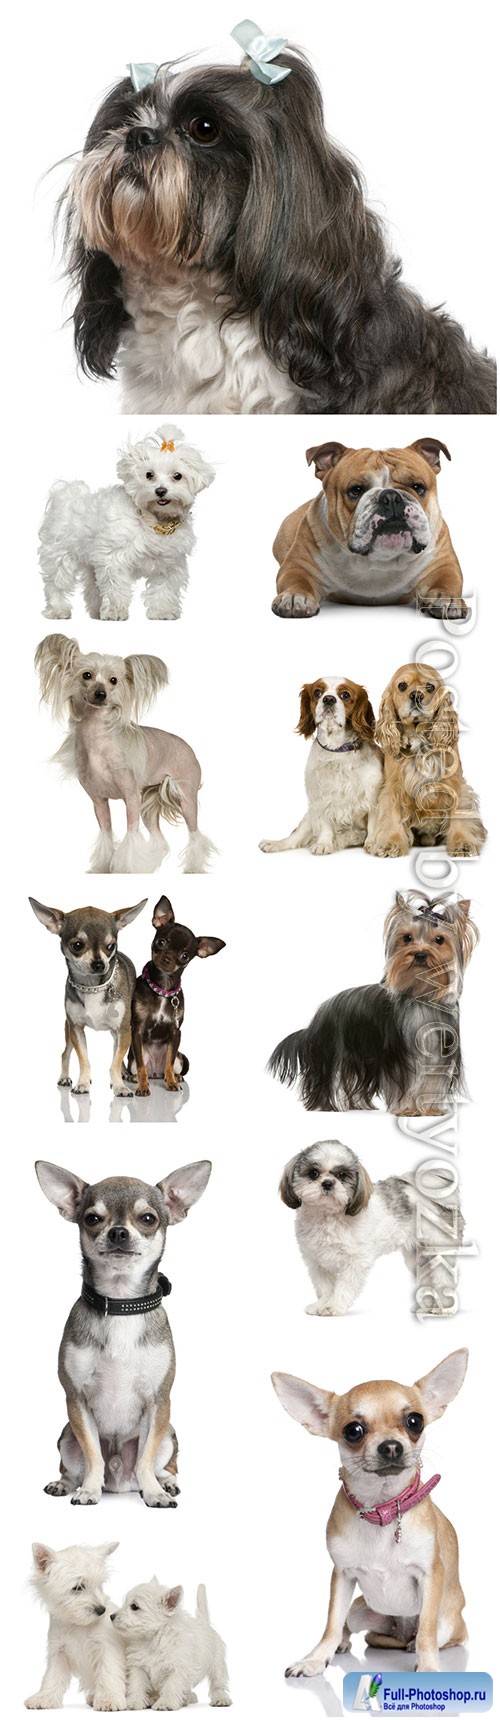 Dogs of different breeds beautiful stock photo